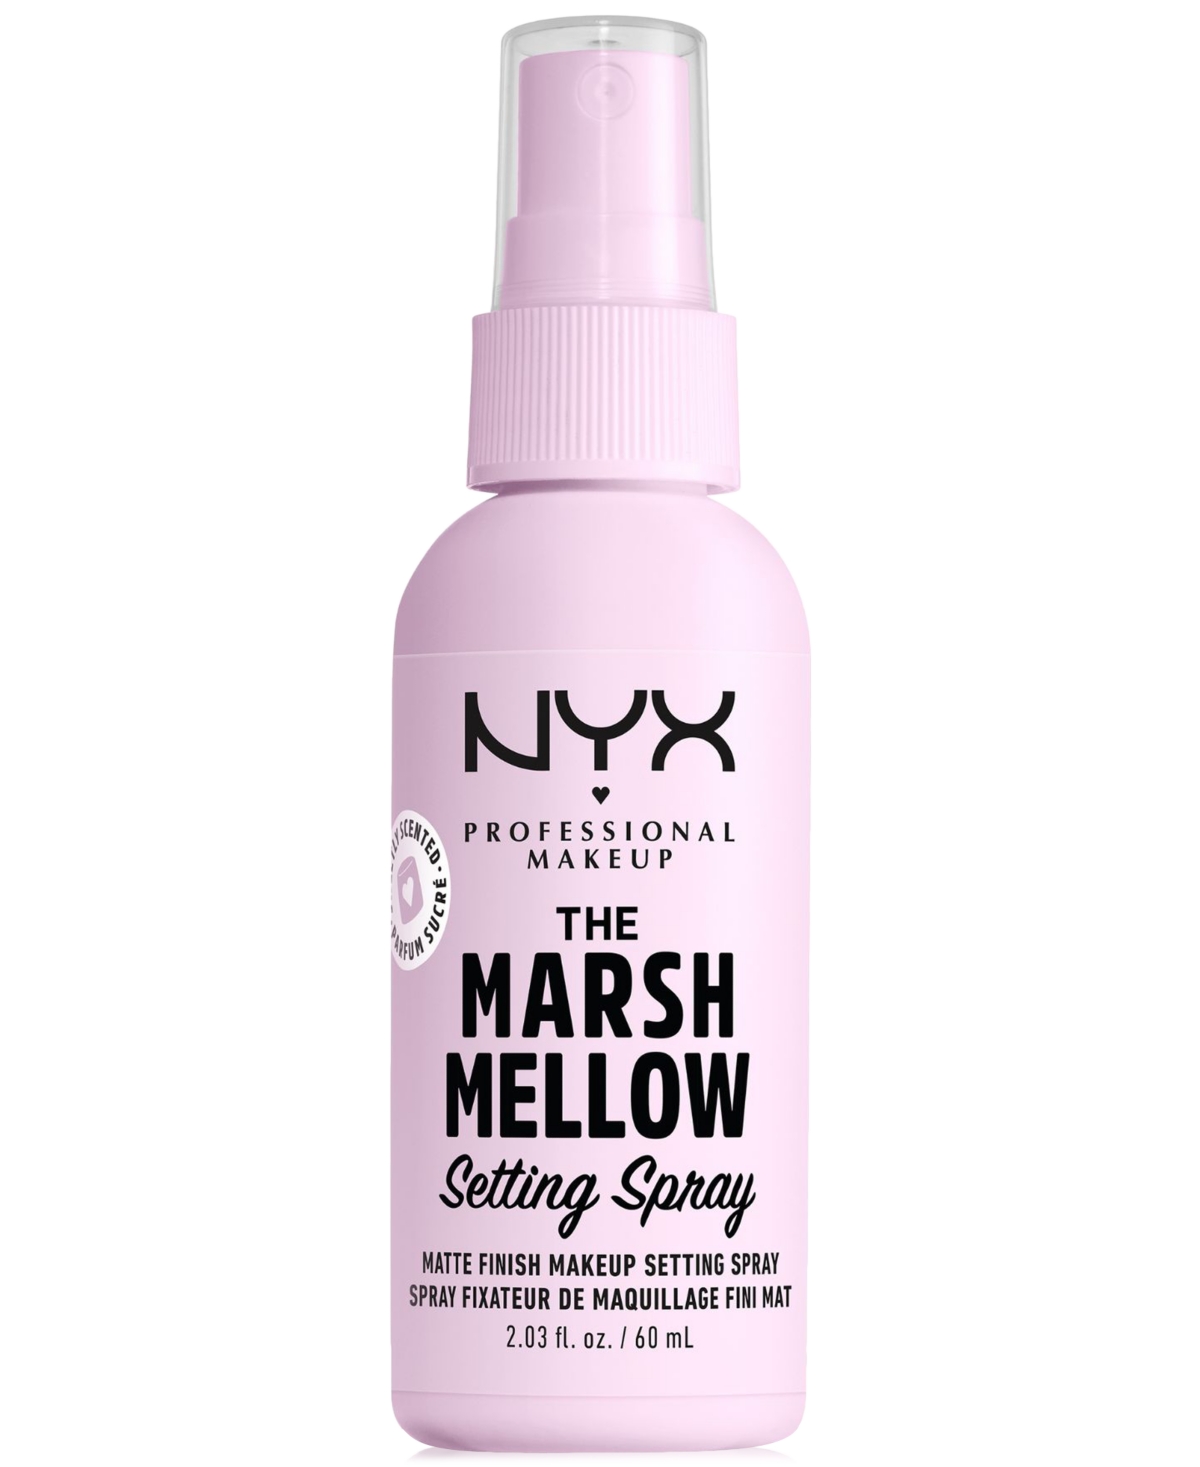 Nyx Professional Makeup Marshmellow Setting Spray, 2.03 Oz. In No Color